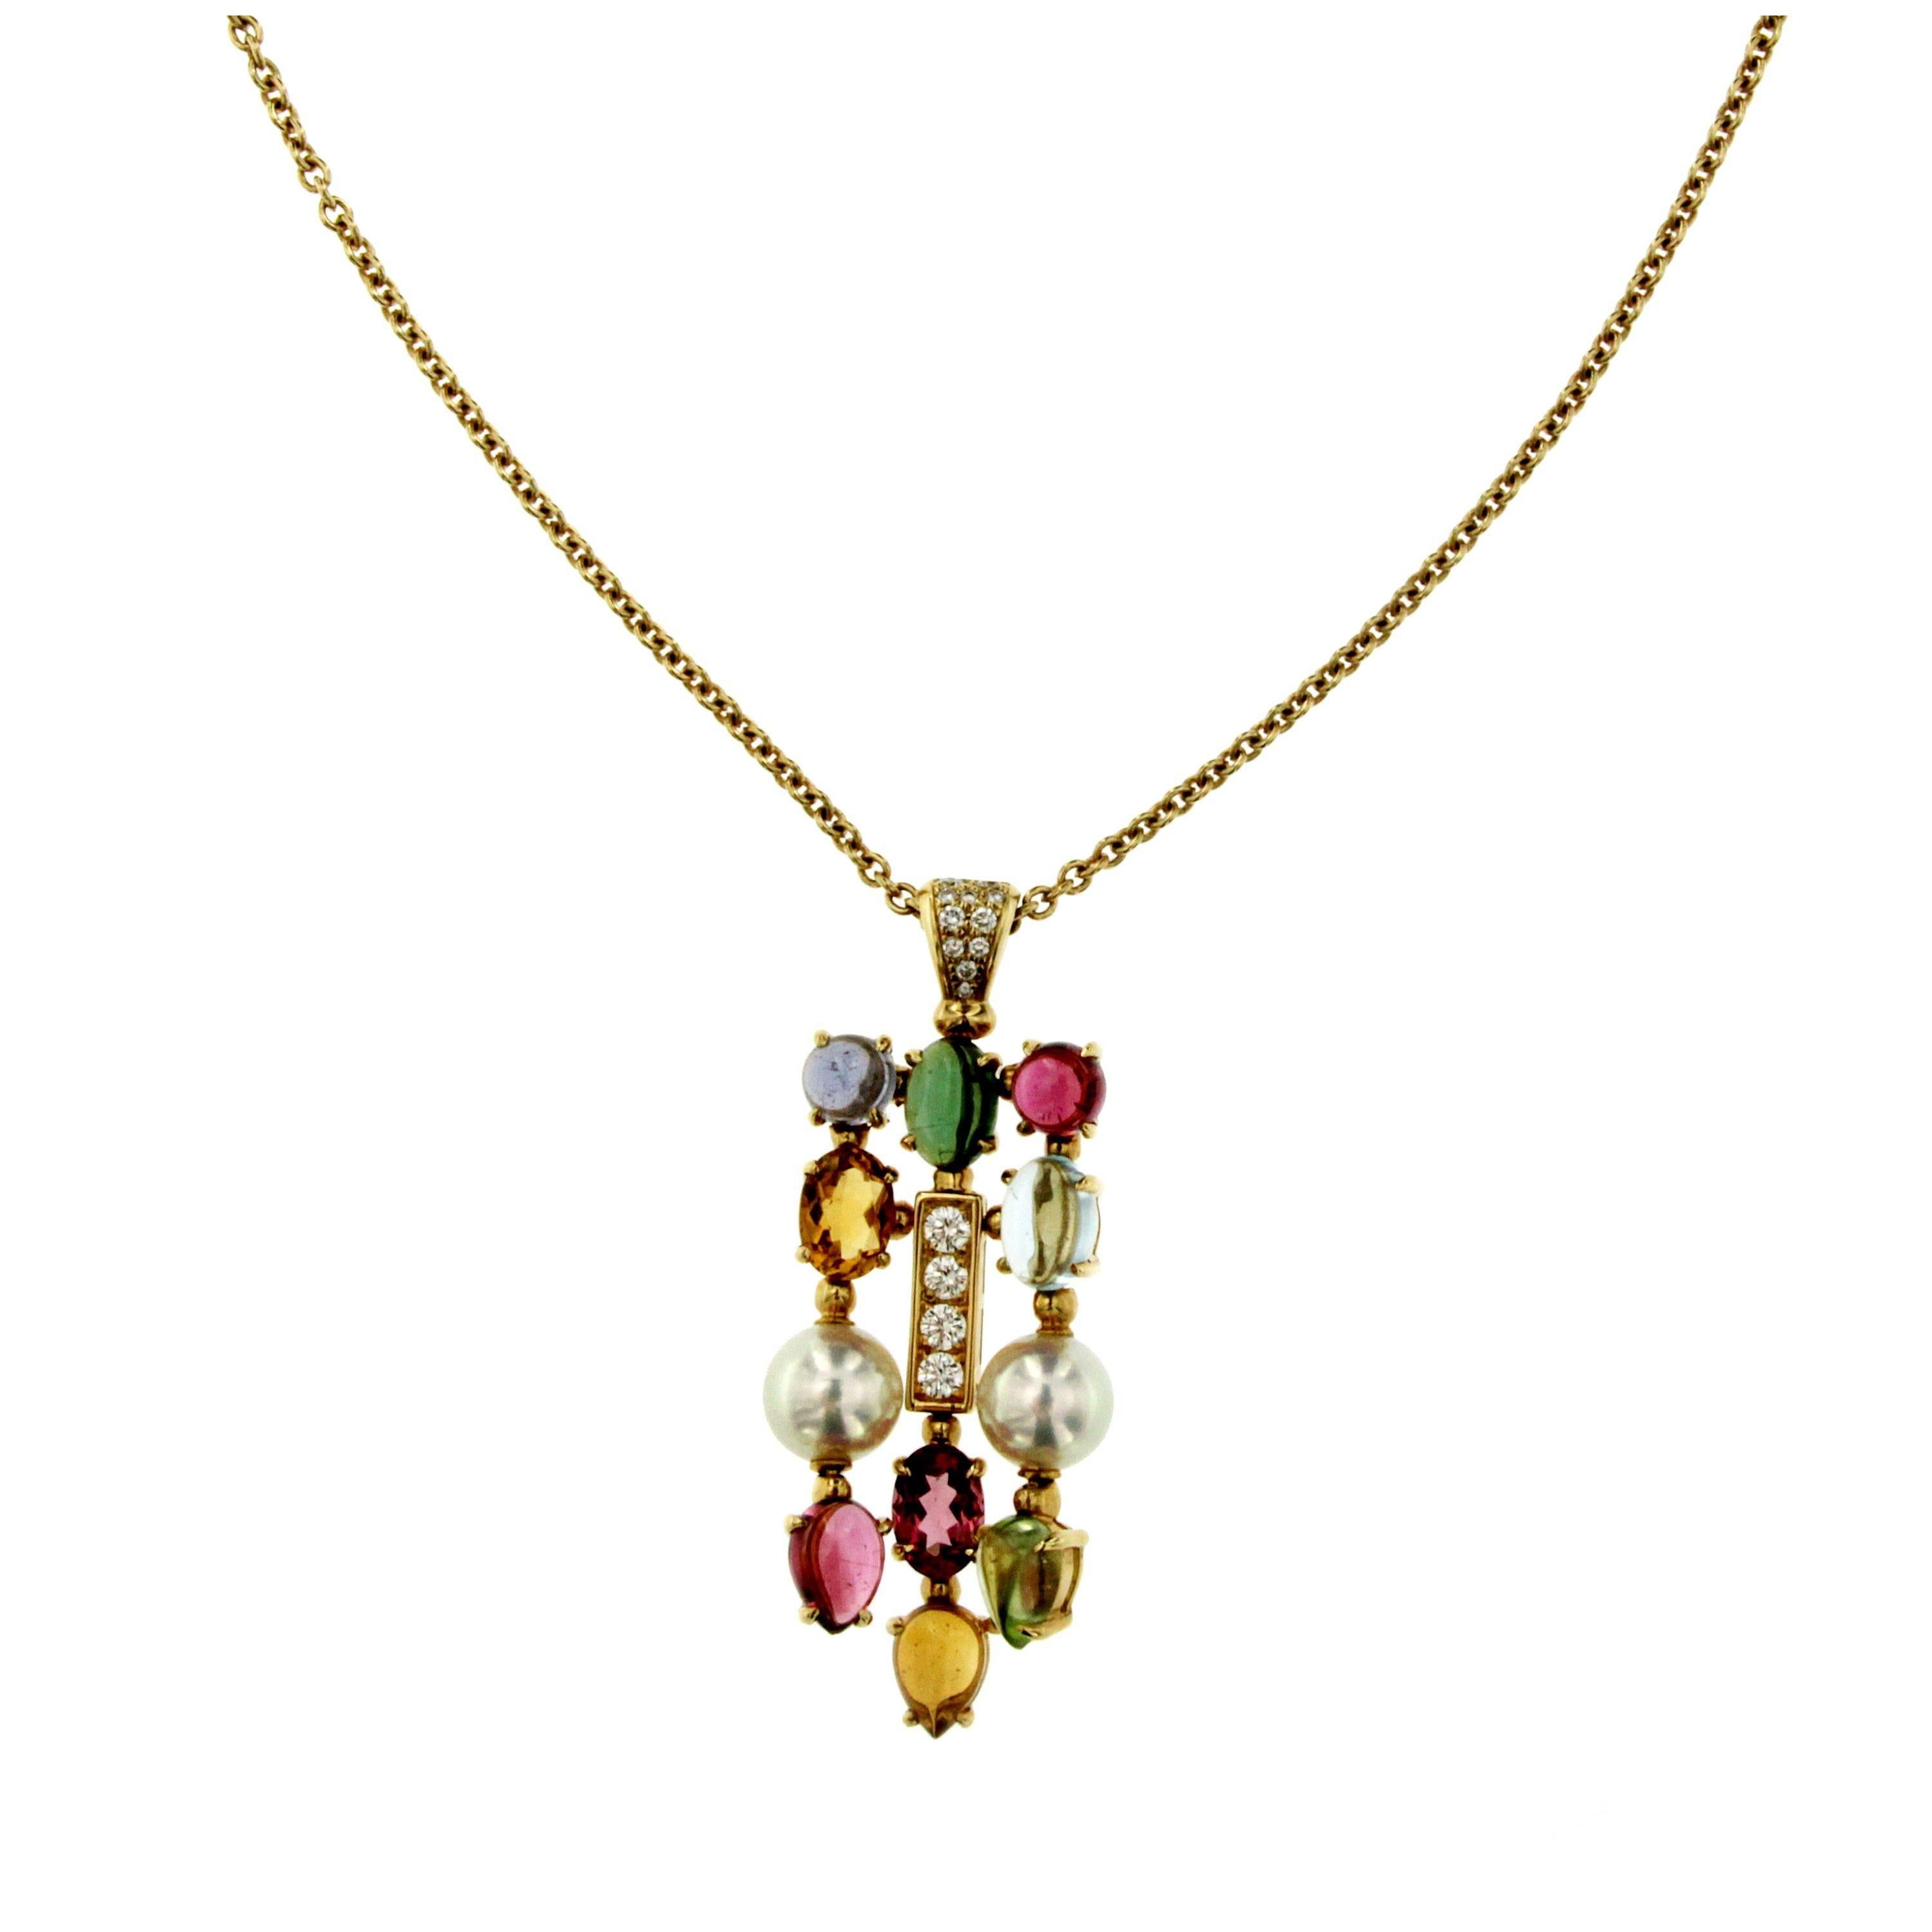 Bulgari's Allegra collection embodies the brand's distinctive and evergreen use of colored gemstones for a distinctive and playful elegance. This 3-row long pendant necklace is made of 18K yellow gold and boasts a pendant set with pink and green